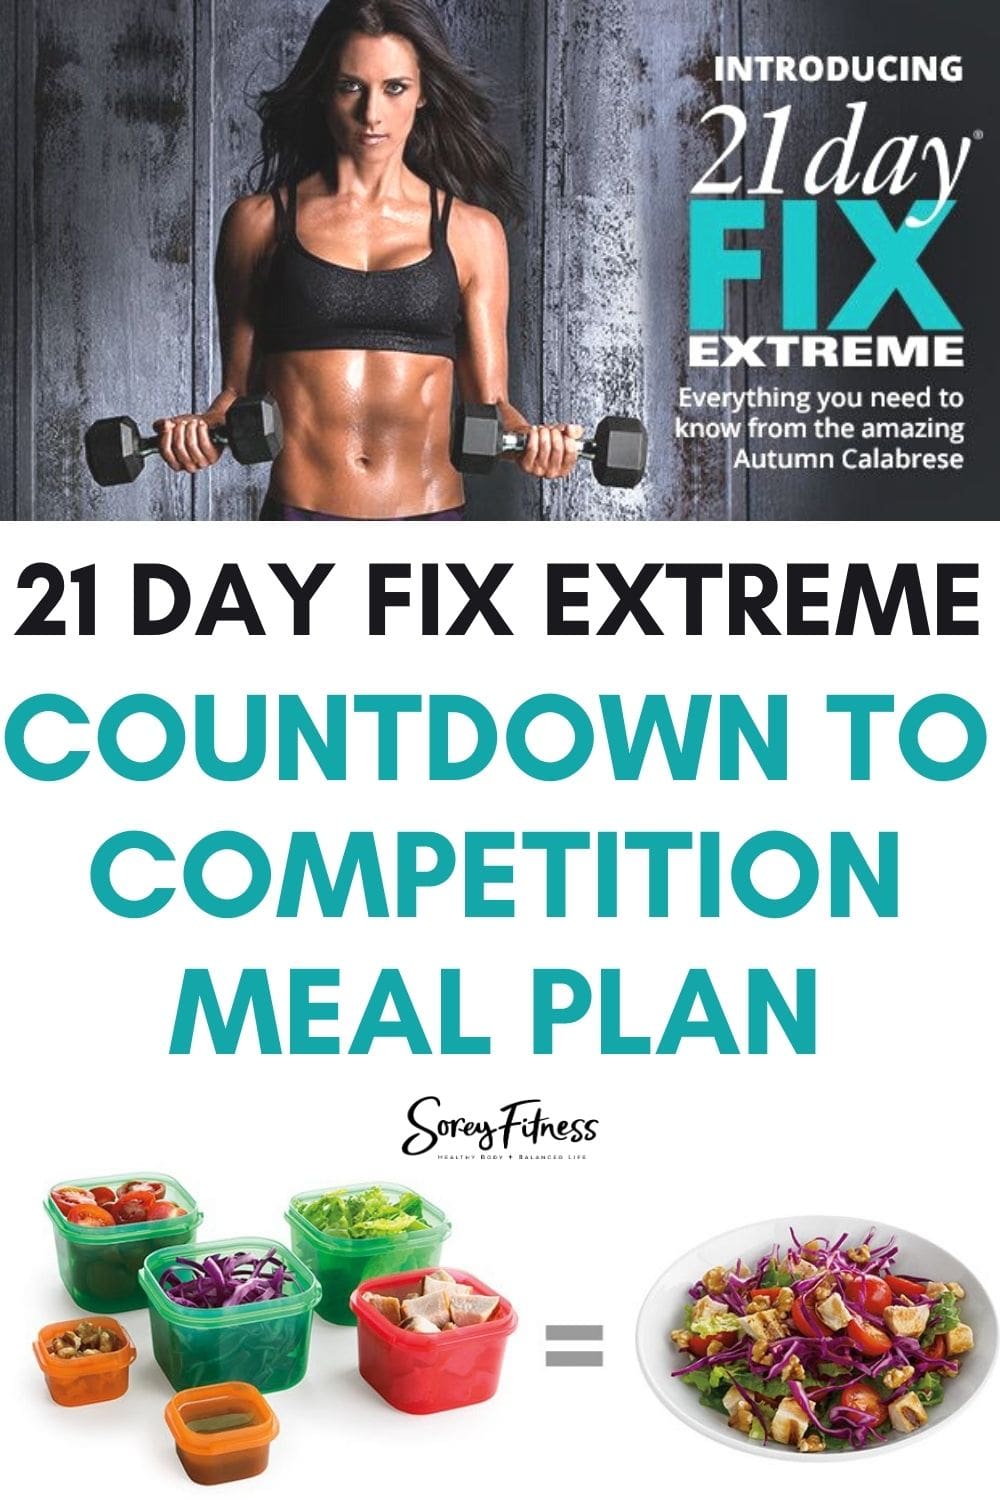 21 day fix extreme meal plan 1200 calories